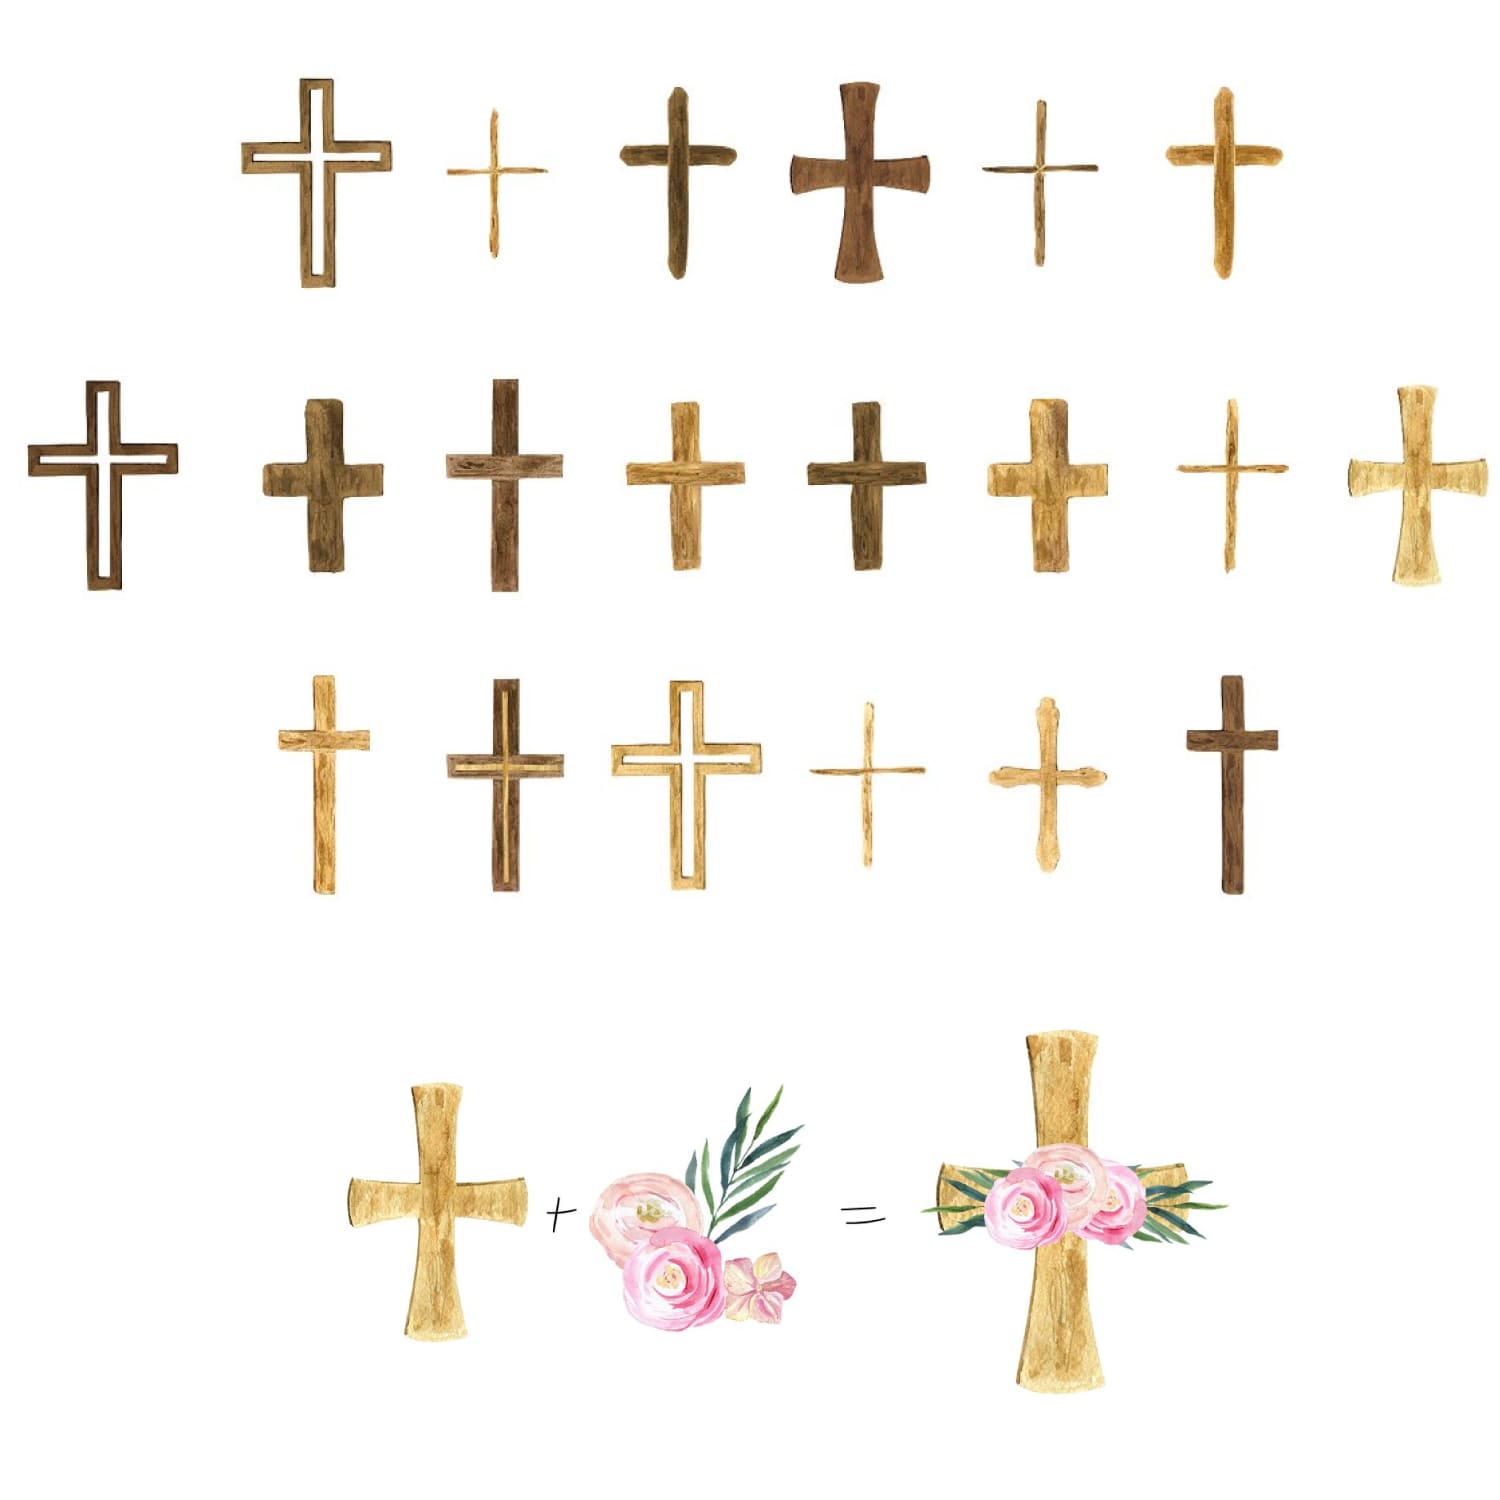 Many wooden crosses on a white background.